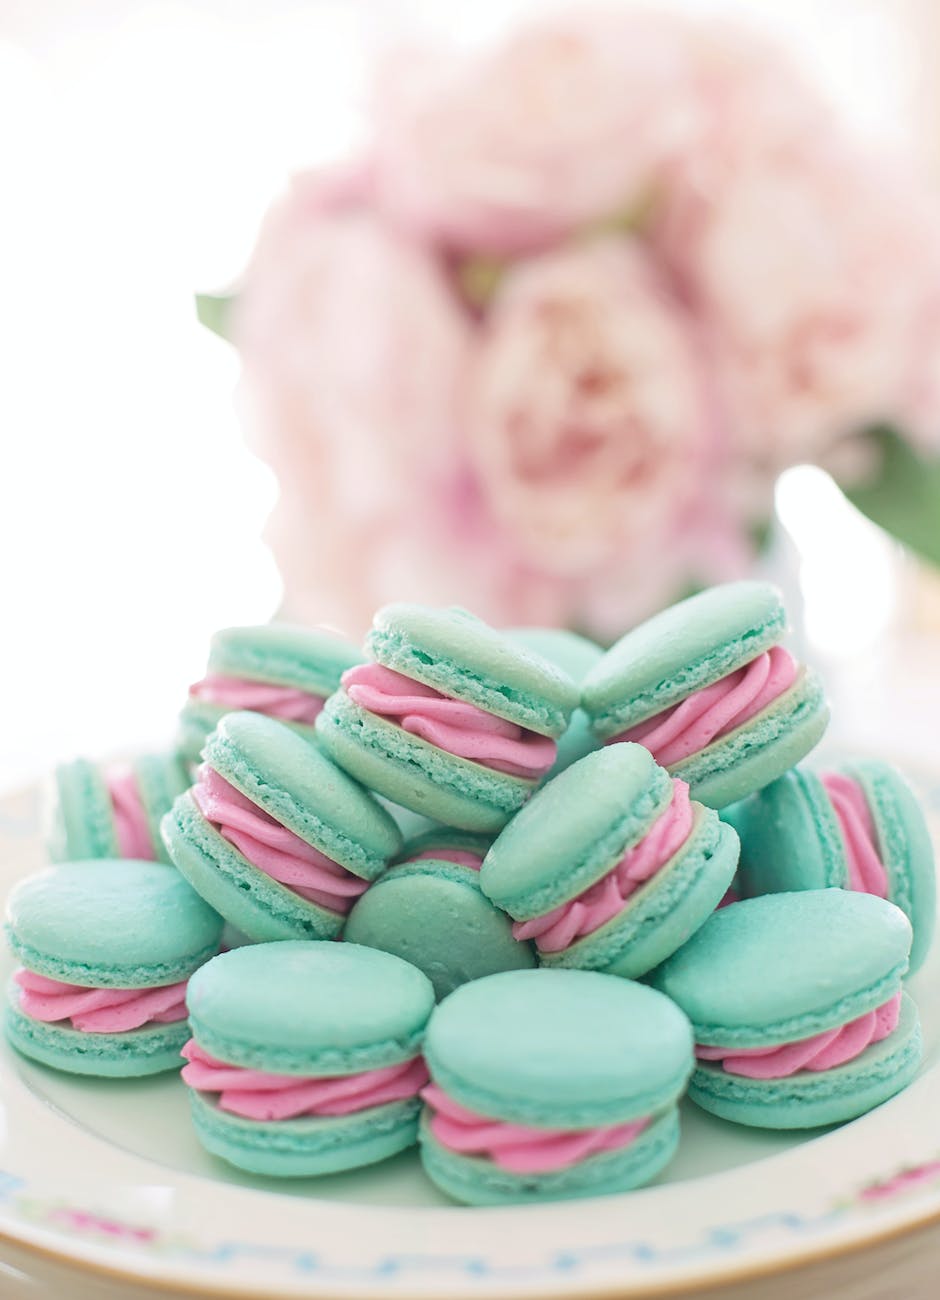 photo of macrons on plate